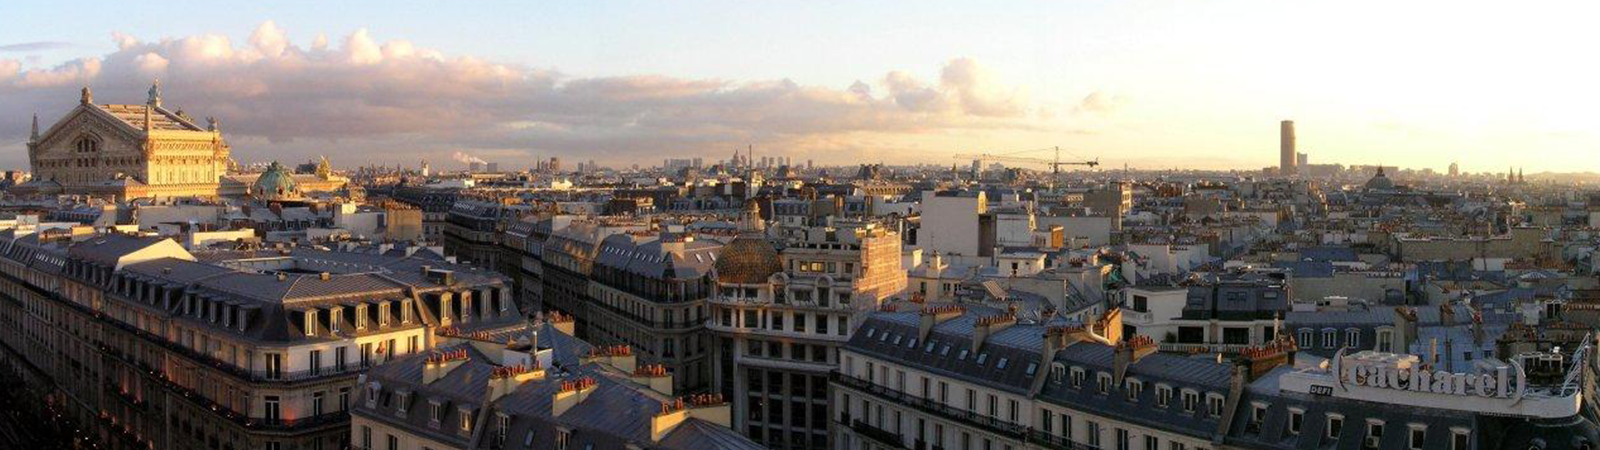 The Paris skyline without skyscrapers